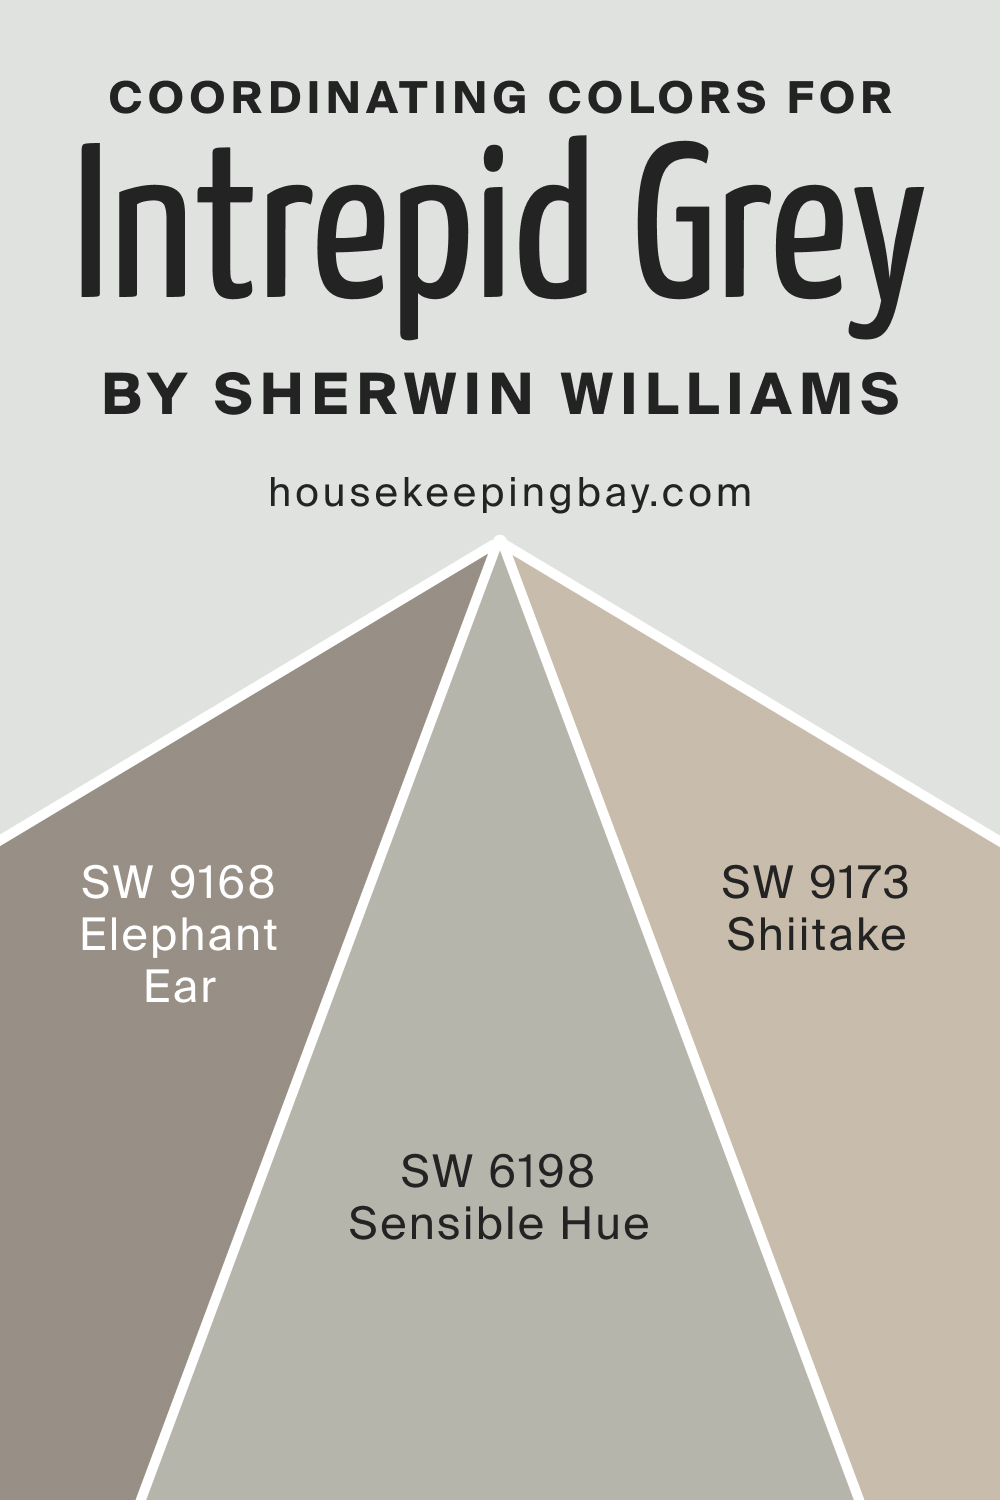 Coordinating Colors for SW 9556 Intrepid Grey by Sherwin Williams